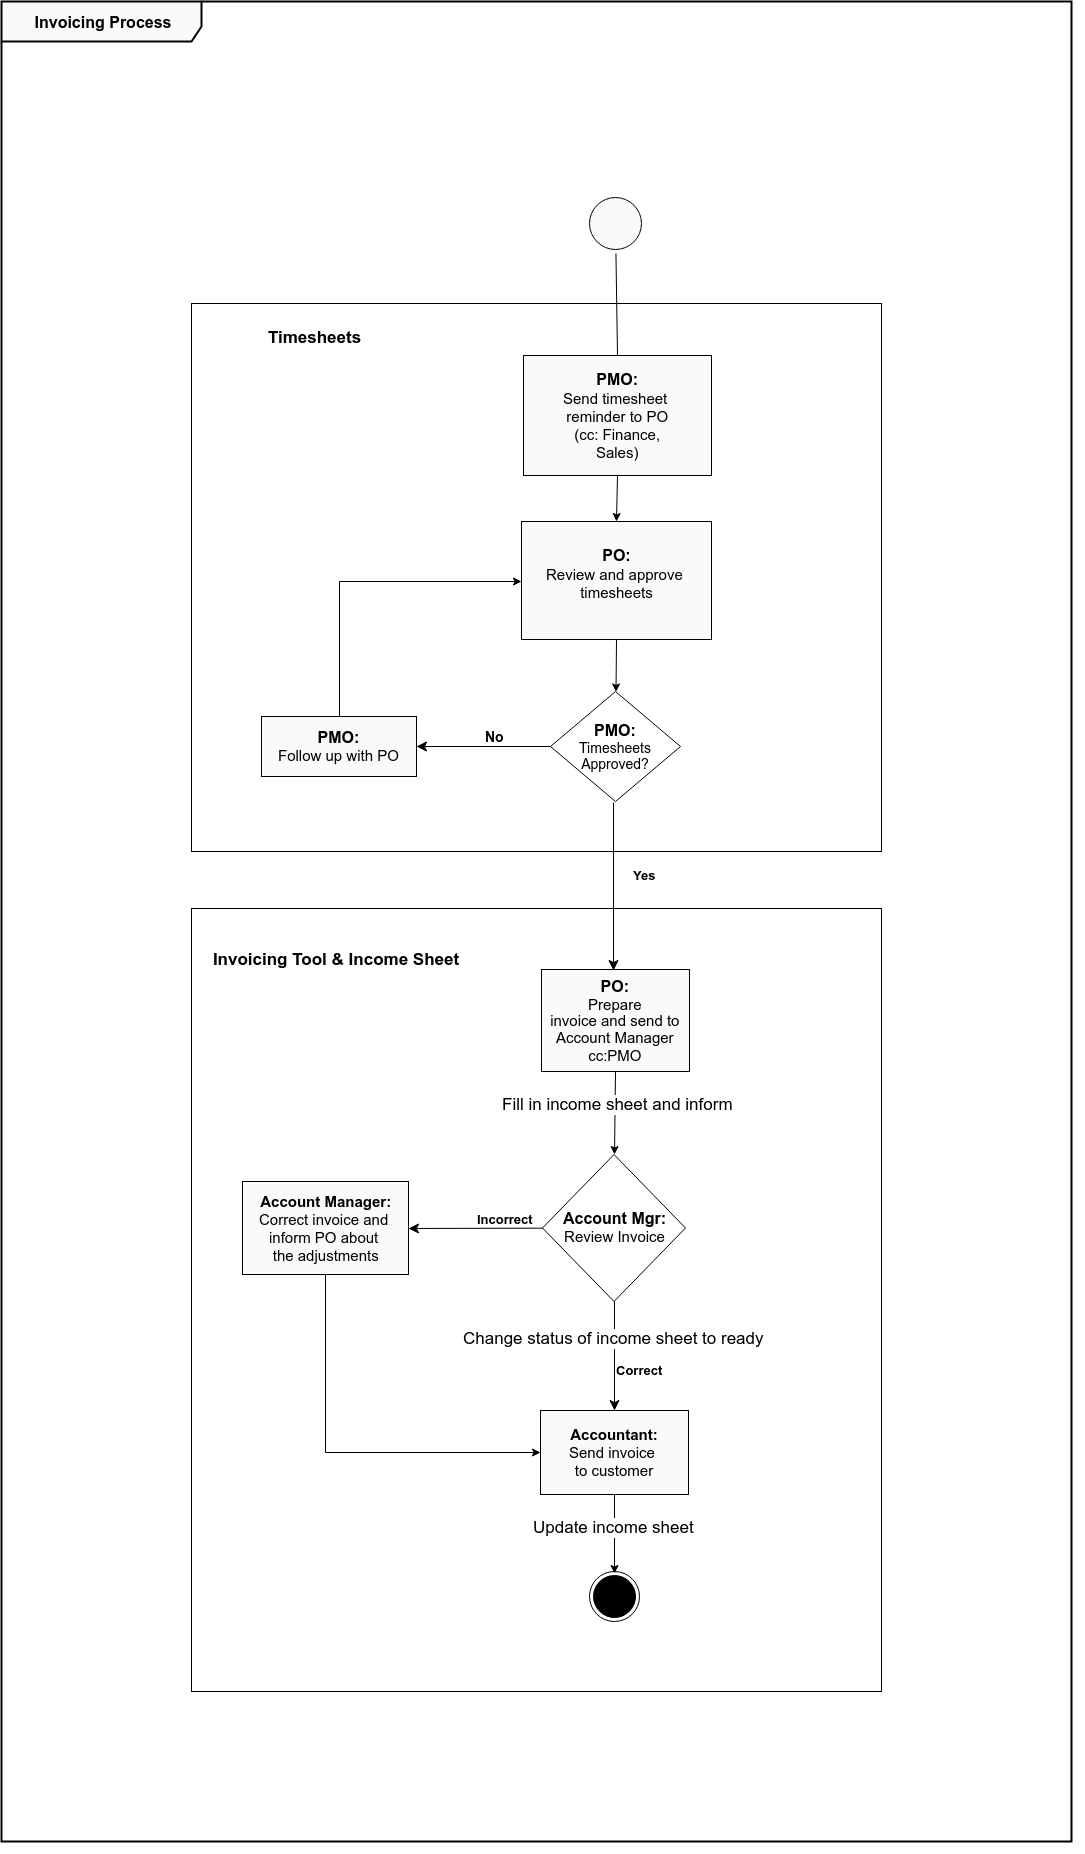 UML activity diagram for the invoice process